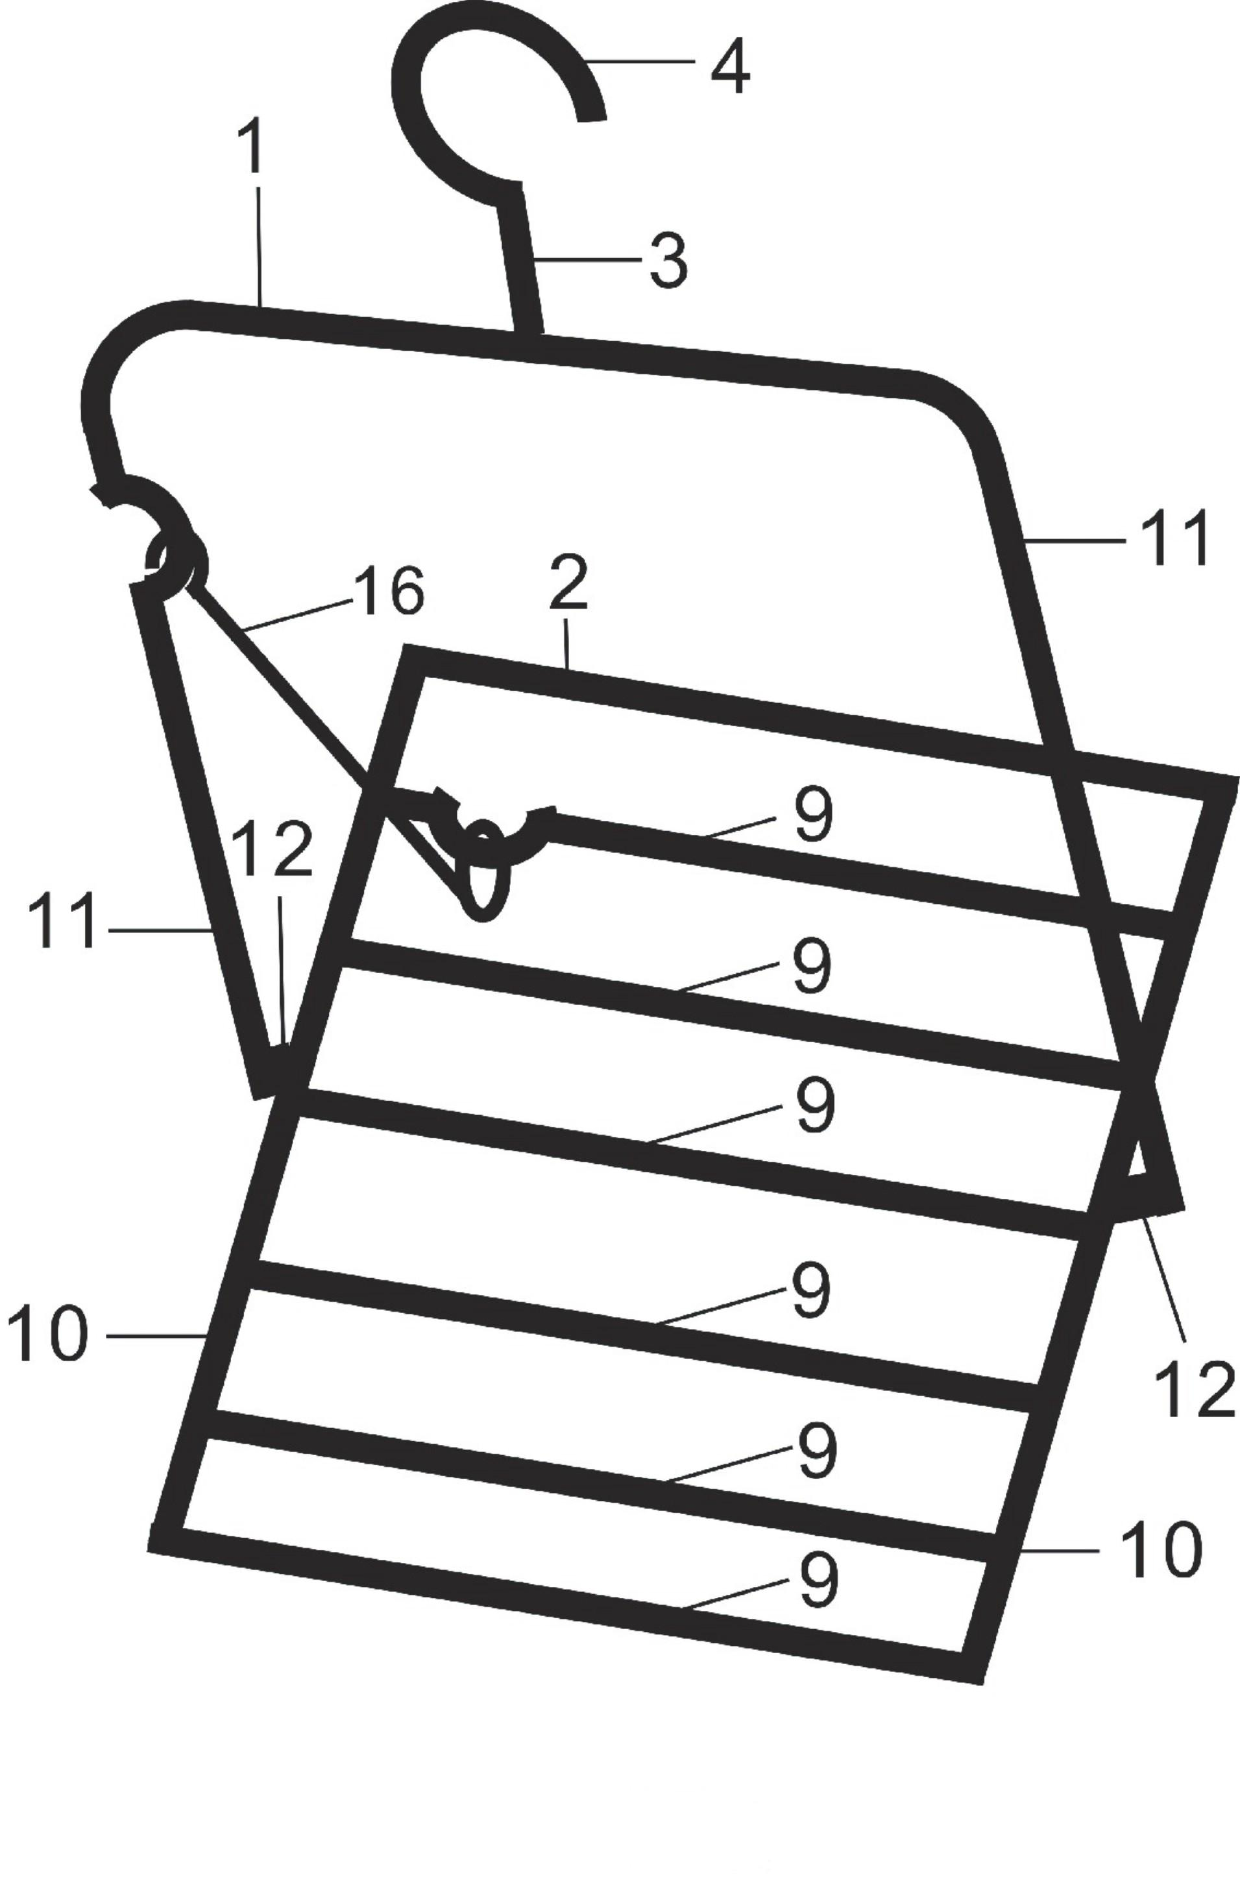 Clothes hanger with airing plate